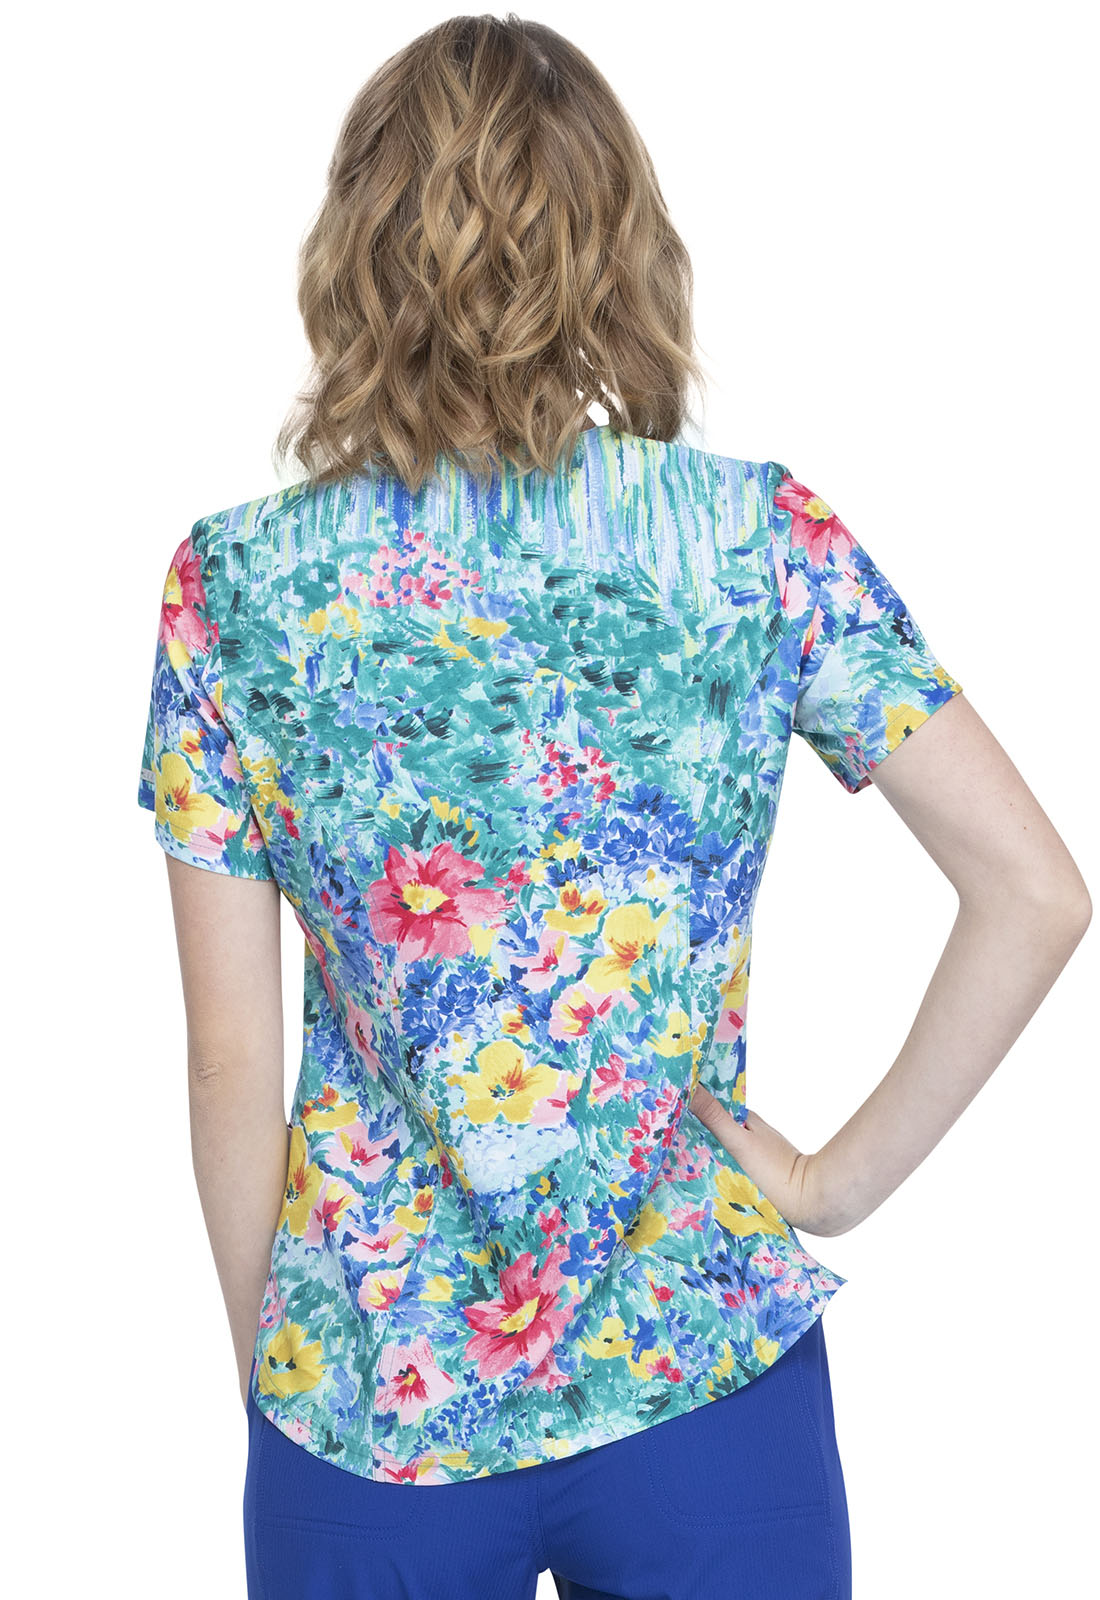 V-Neck Top in Hand Painted Posies